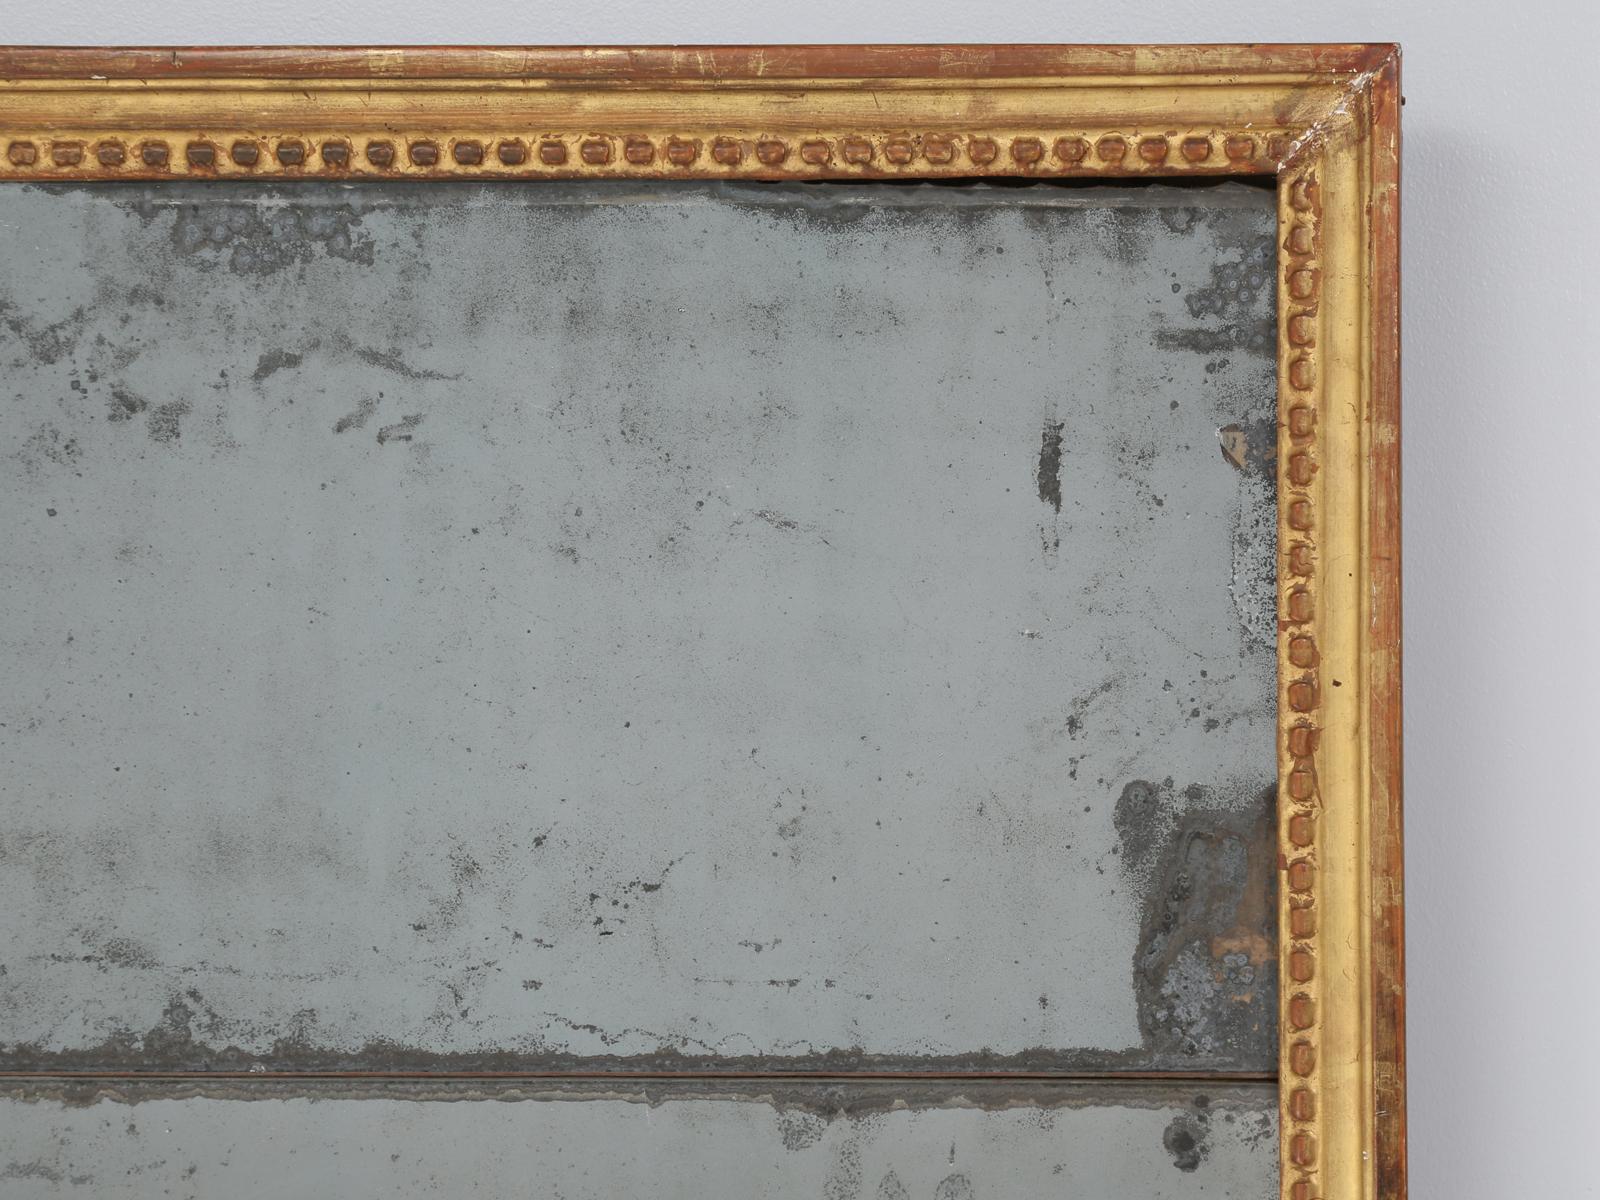 Seems like only once every 4 or 5 years, we get a truly exceptional Louis XVI style mirror and this time, we received a true gem. This antique French Louis XVI mirror, just oozes patina in spades and looks every bit like what you would expect, a